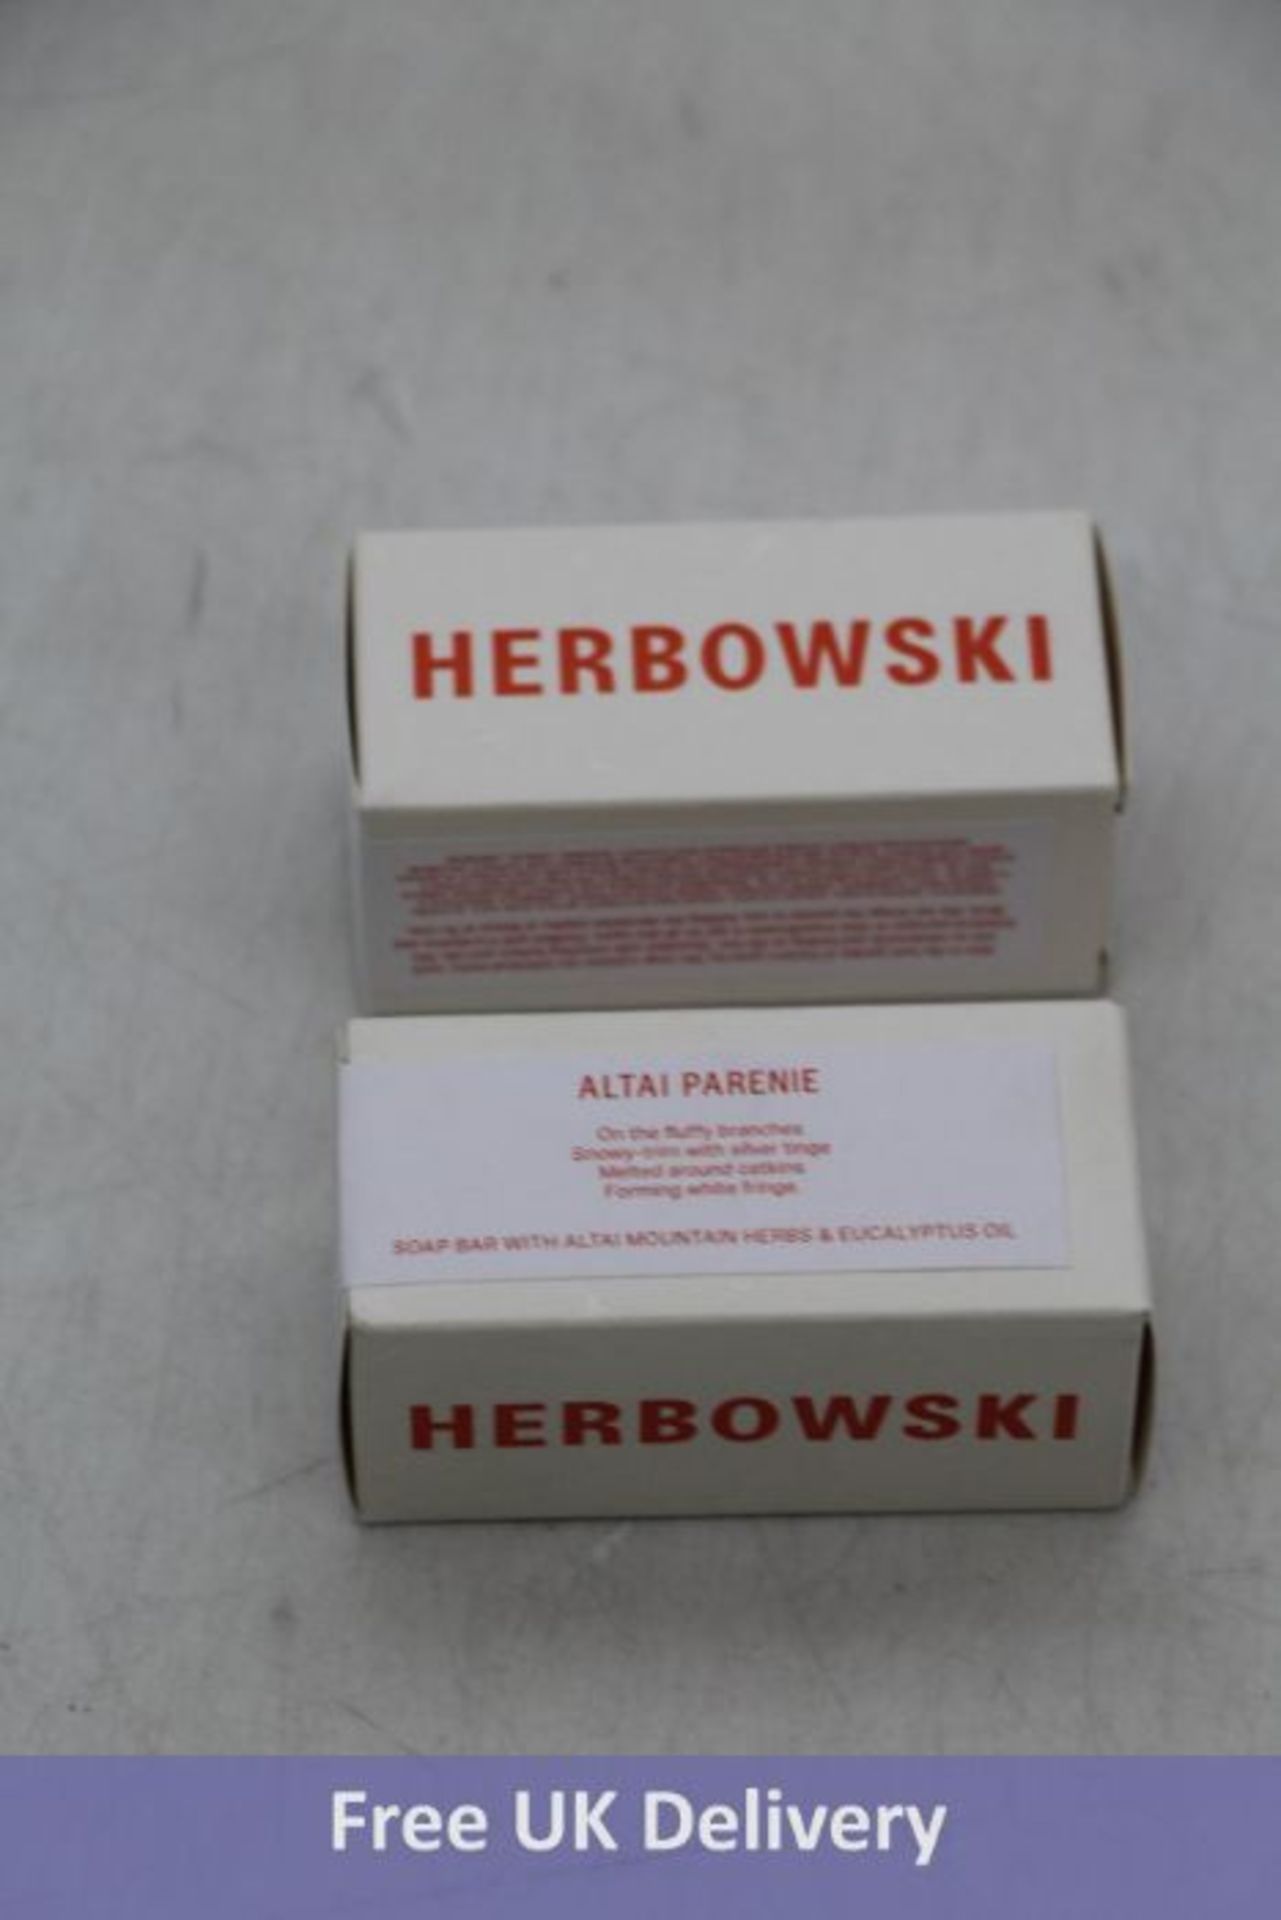 Eighteen Herbowski Altai Parenie Cleansing Soap Bars - Image 2 of 2